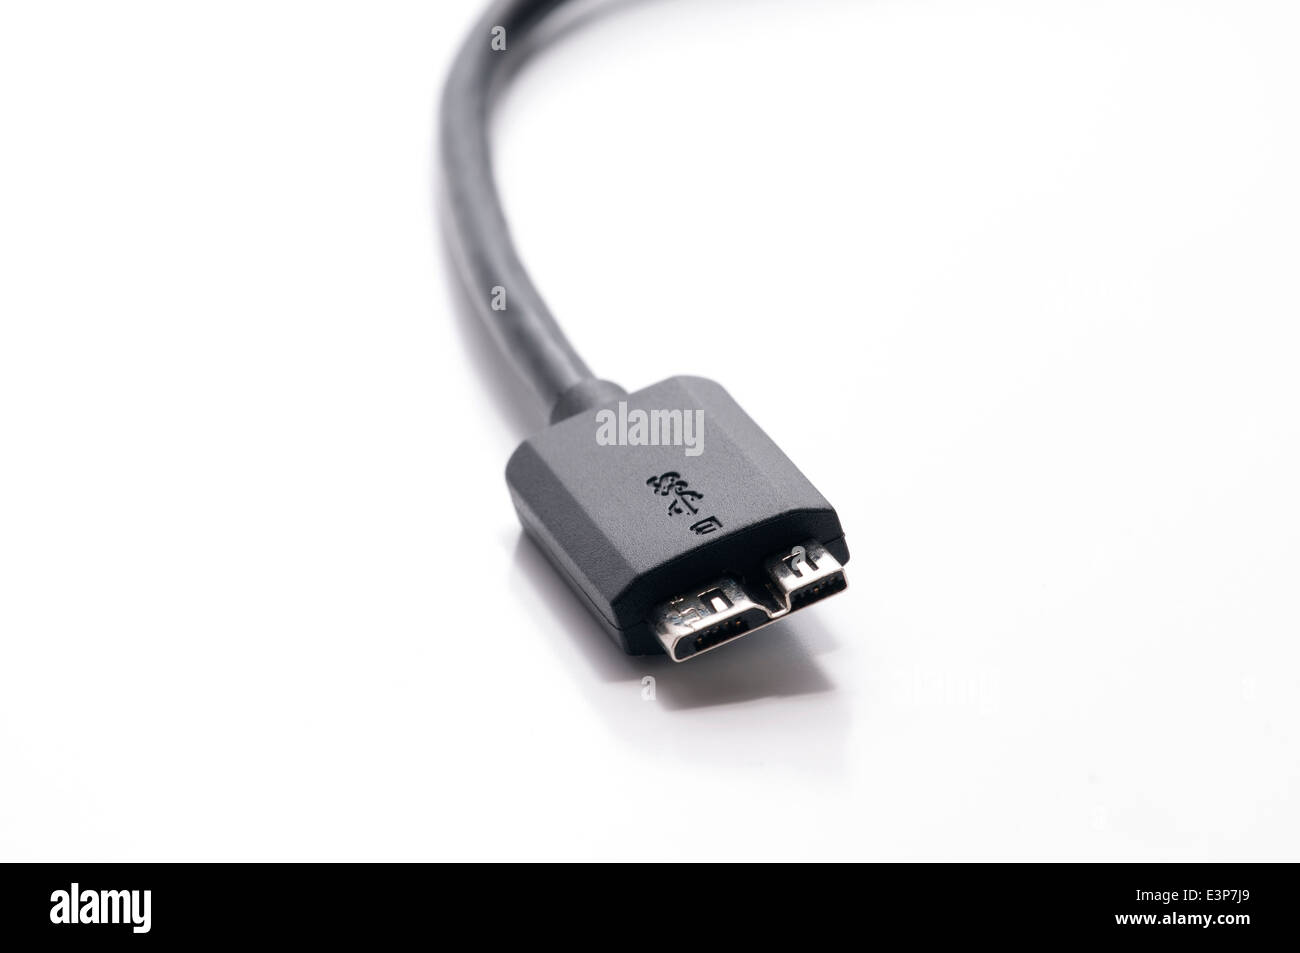 Universal Serial Bus (USB) standard for computer connectivity on white background Stock Photo